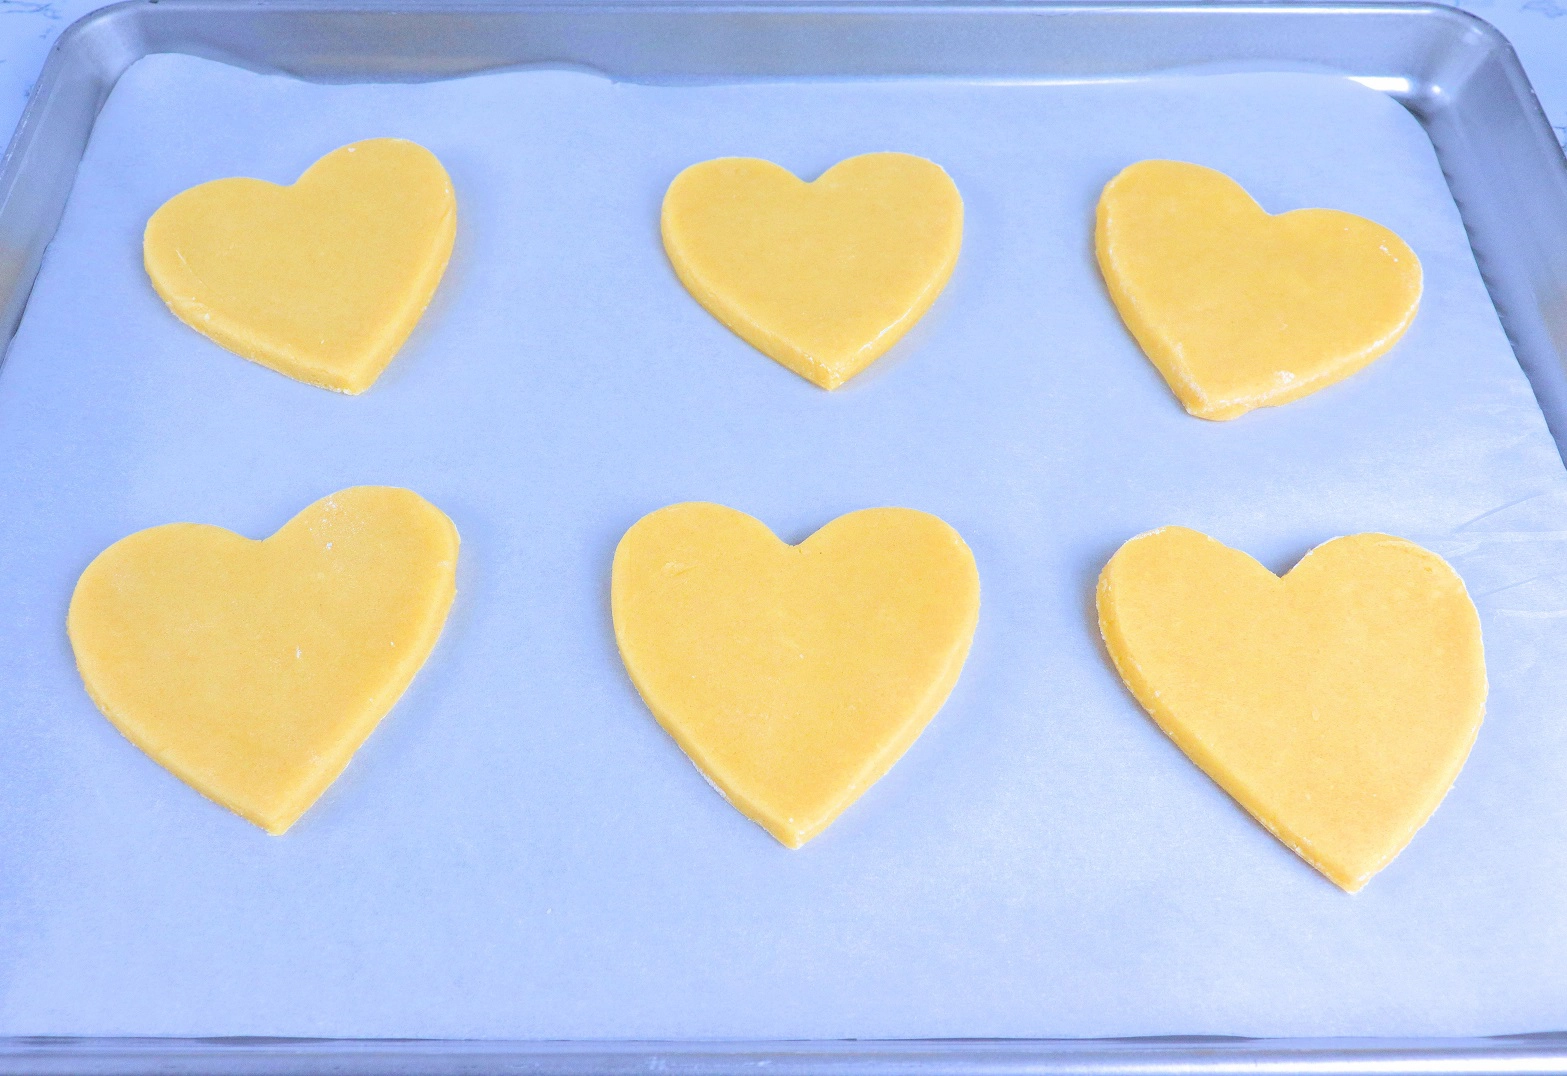 Pre-Baked Heart-Shaped Cookies